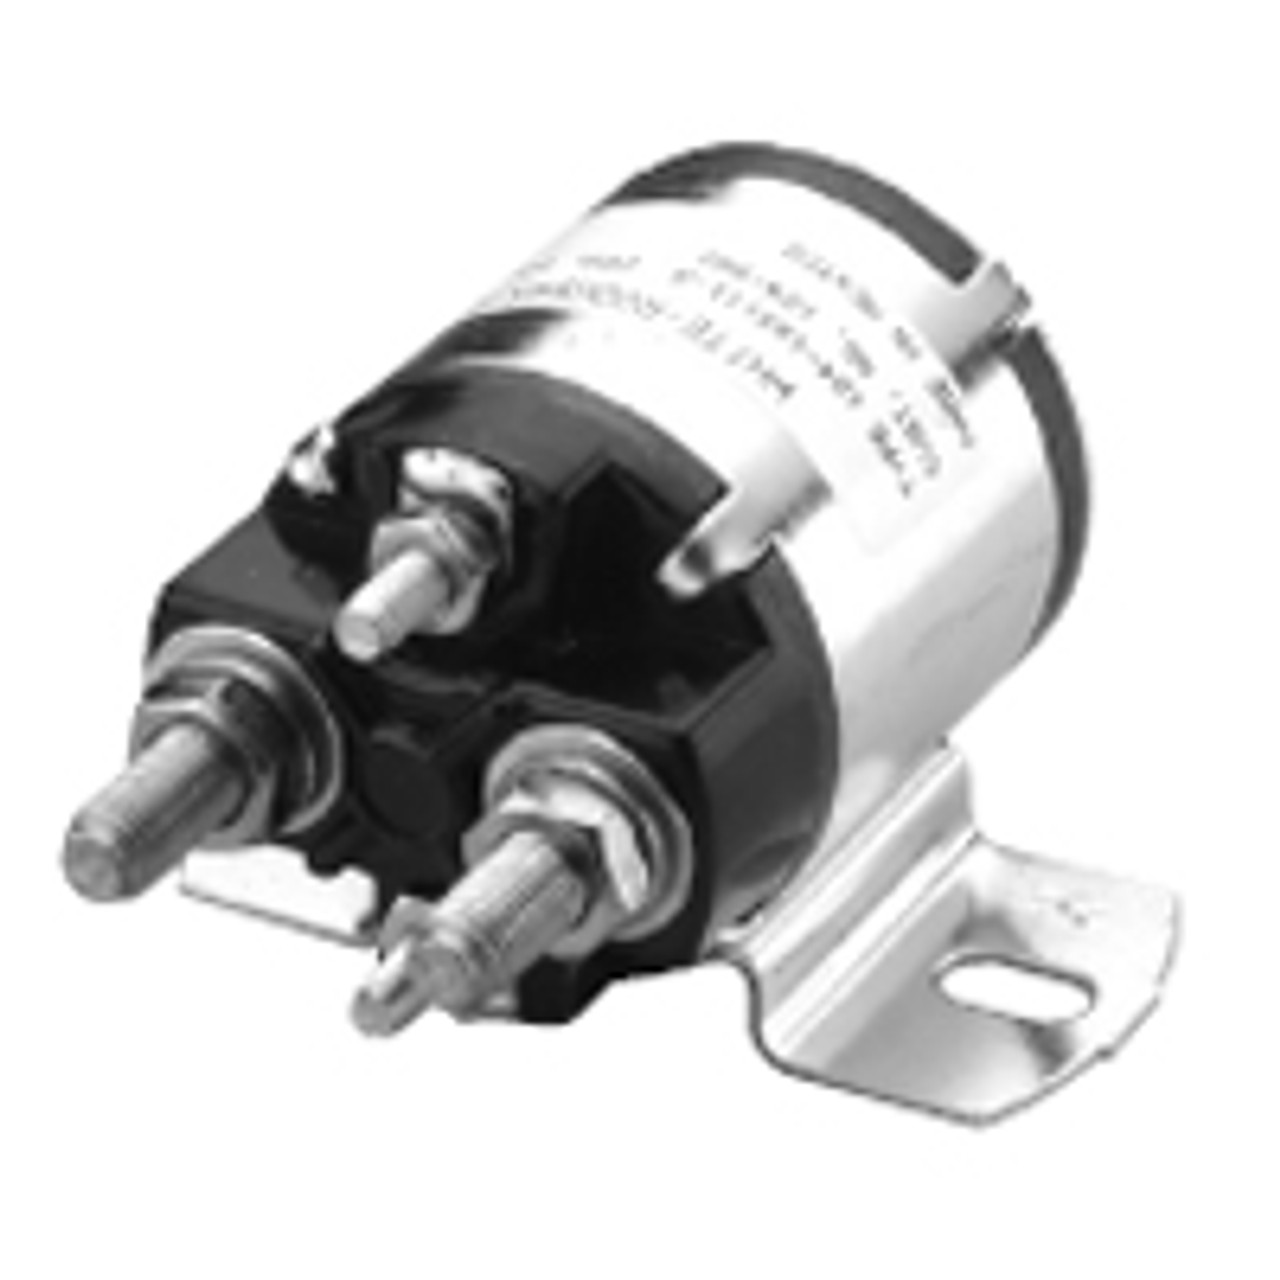 Stancor / White Rodgers 124-903 Power Contactors